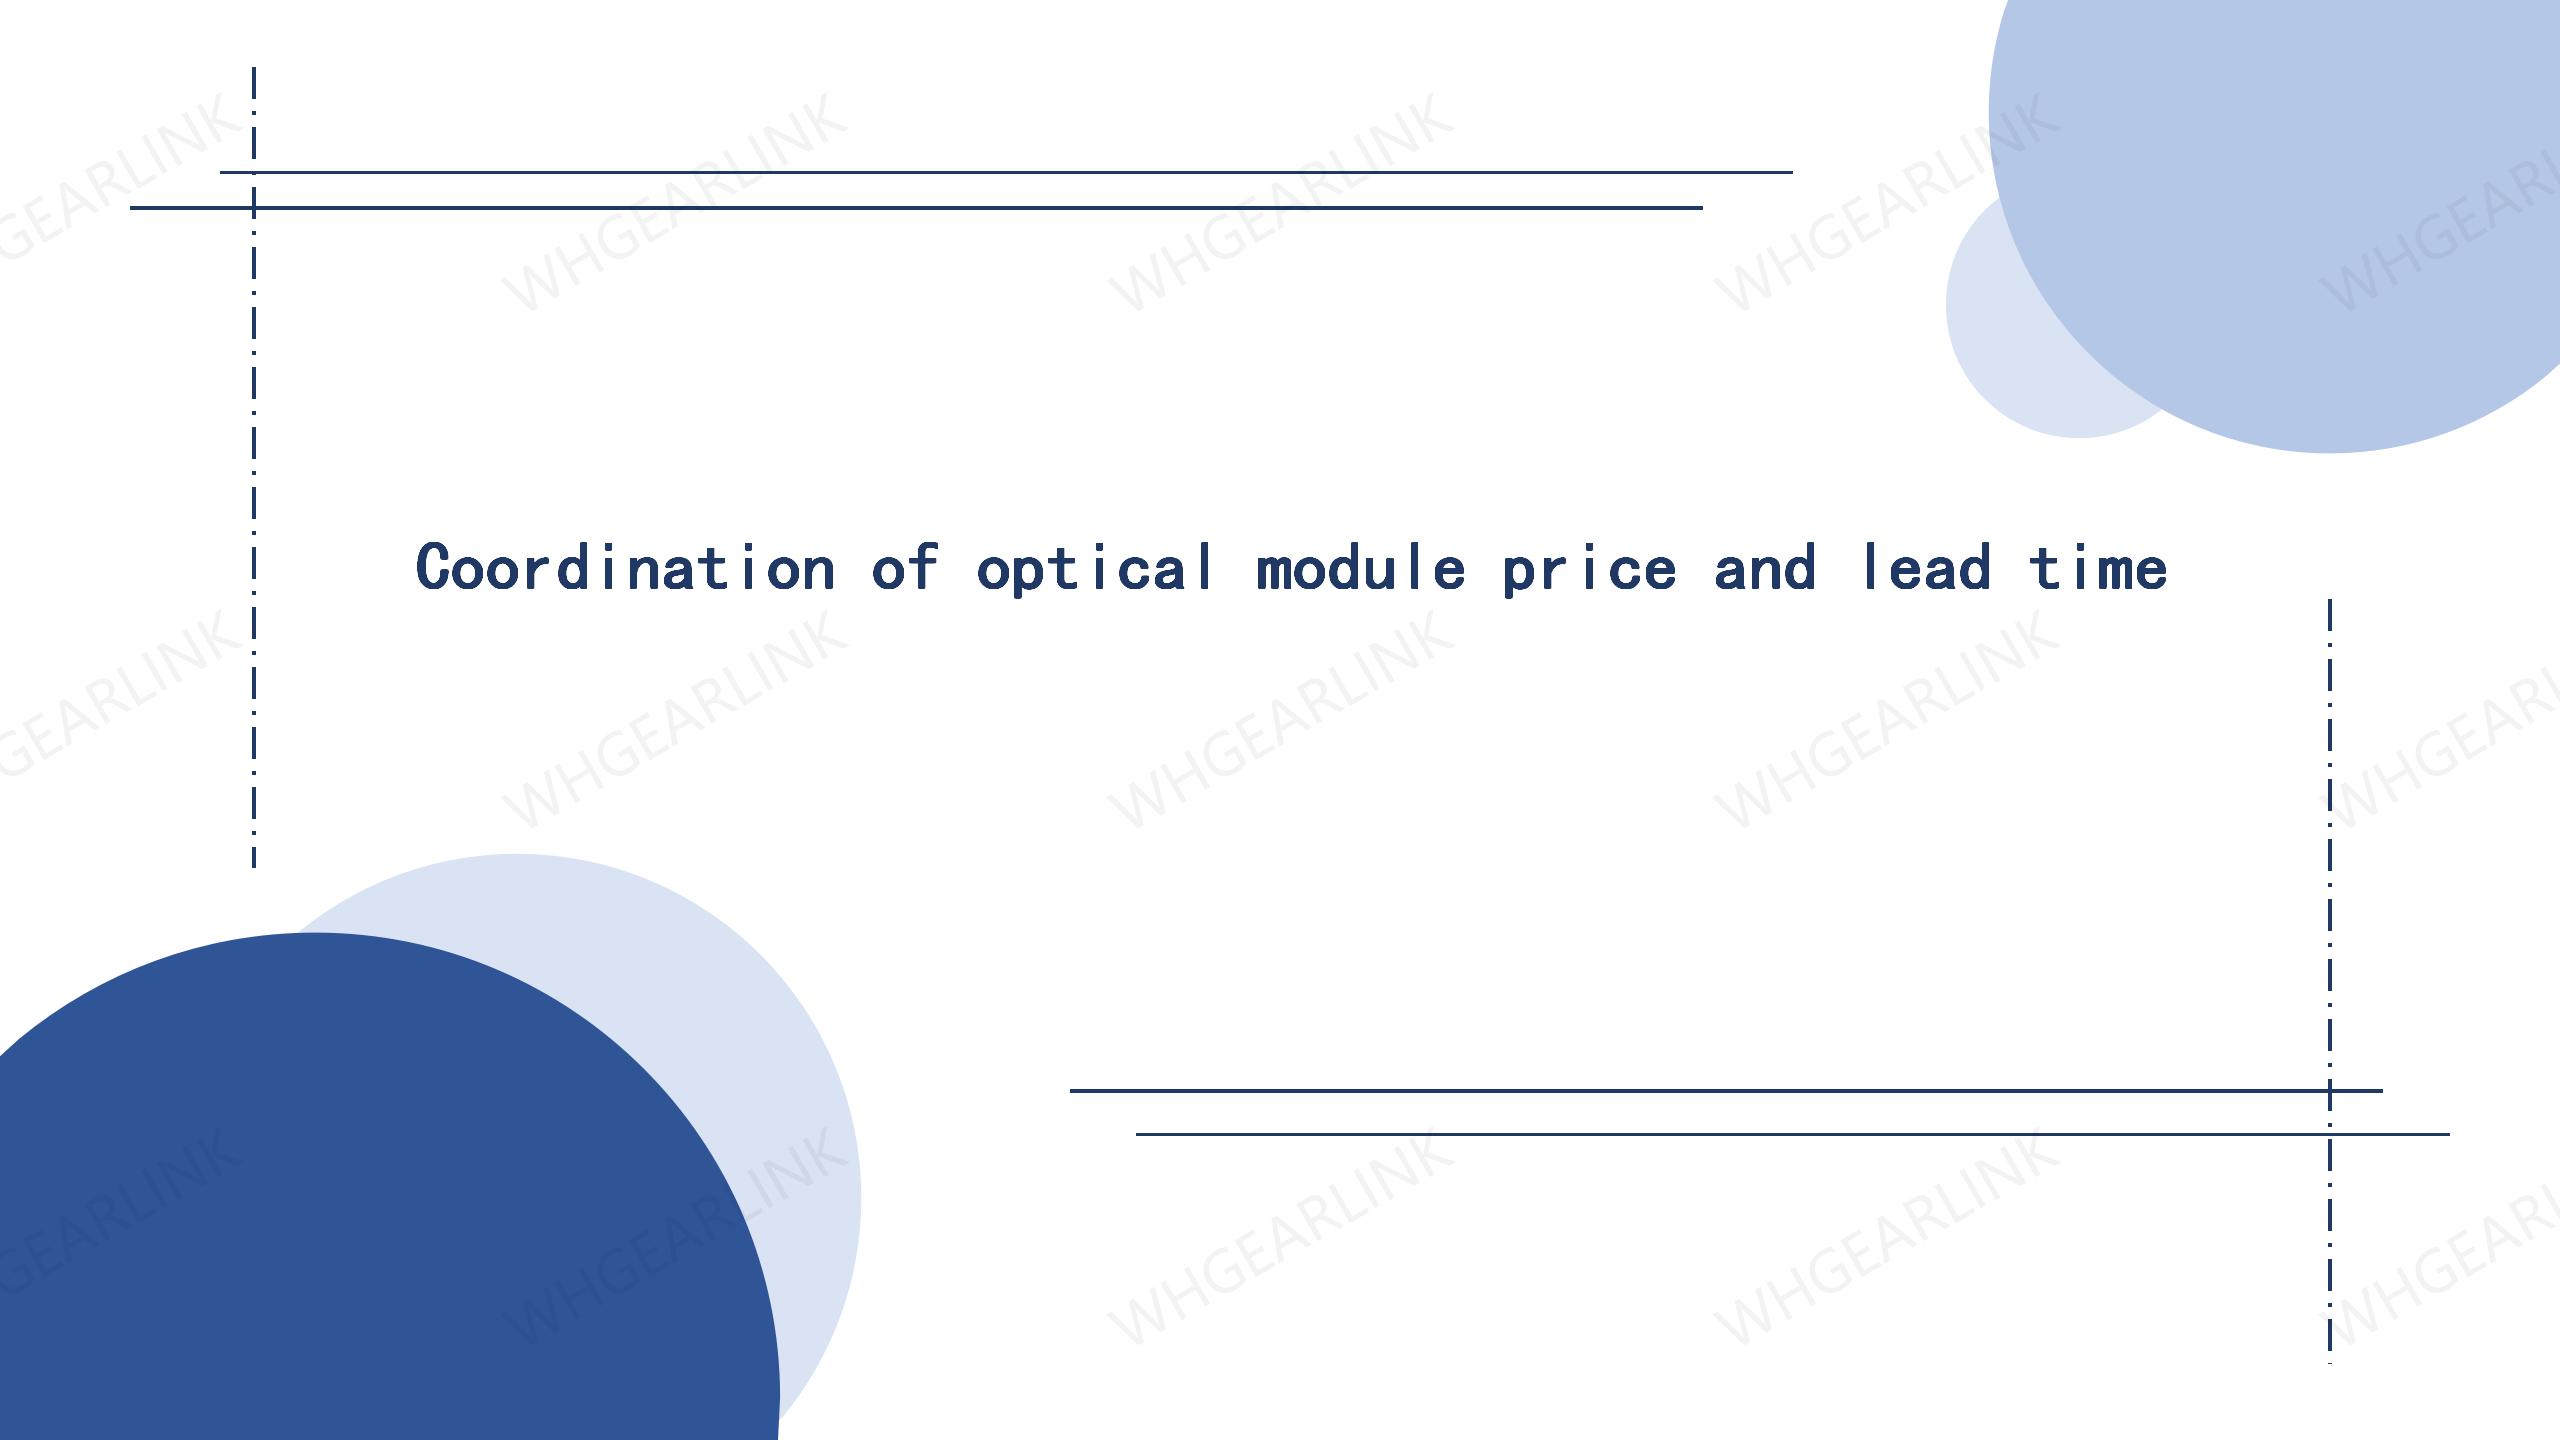 Coordination of optical module price and lead time